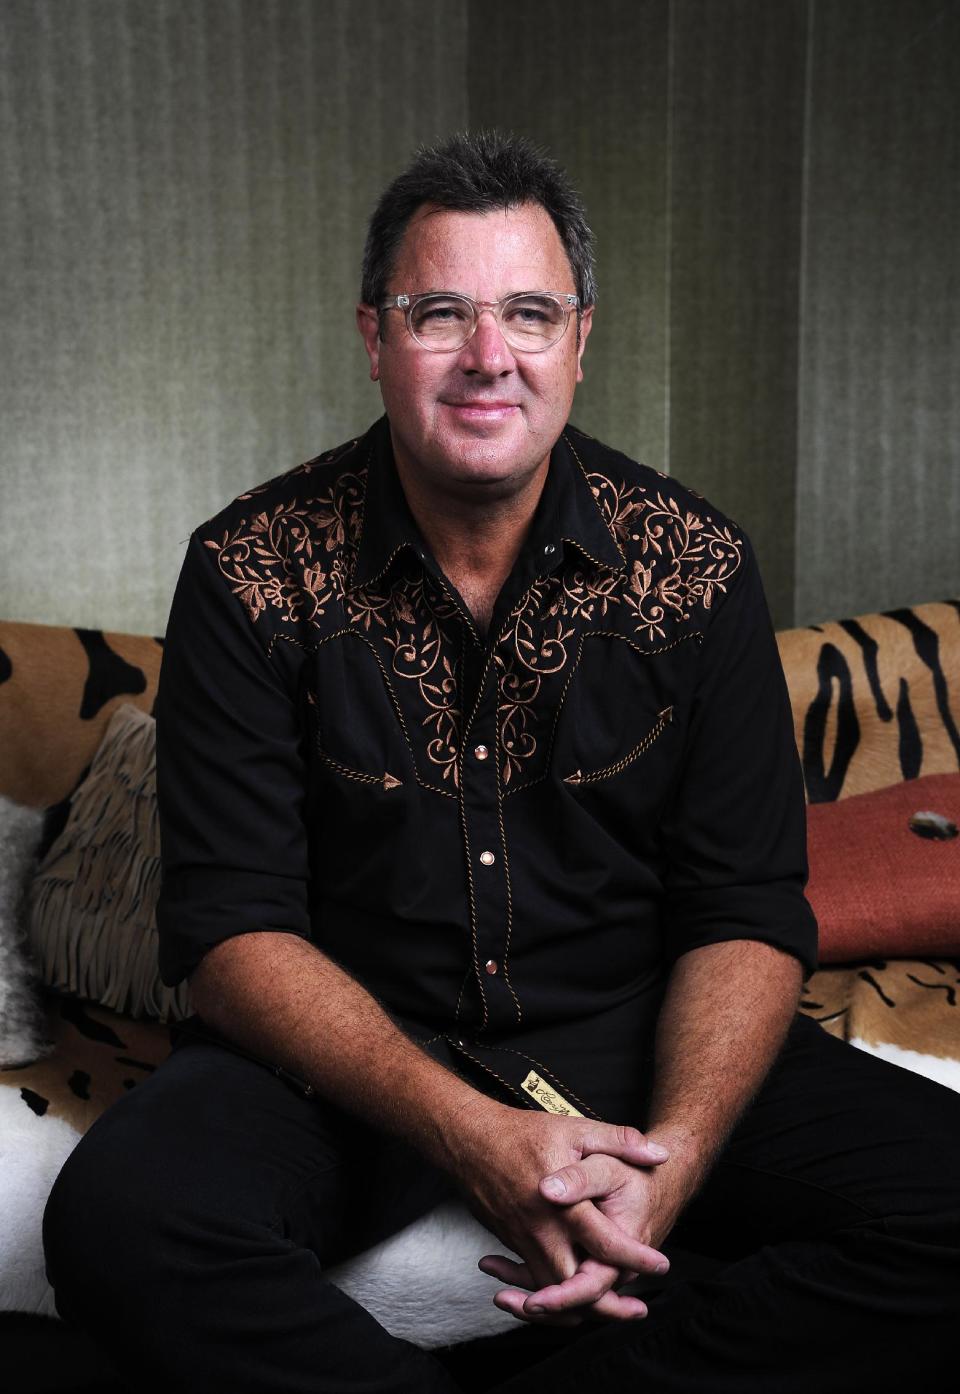 This Saturday, July 27, 2013 photo shows Vince Gill posing at the Grand Ole Opry in Nashville, Tenn. Gill and Franklin released their latest album "Bakersfield," on July 30. (Photo by Donn Jones/Invision/AP)